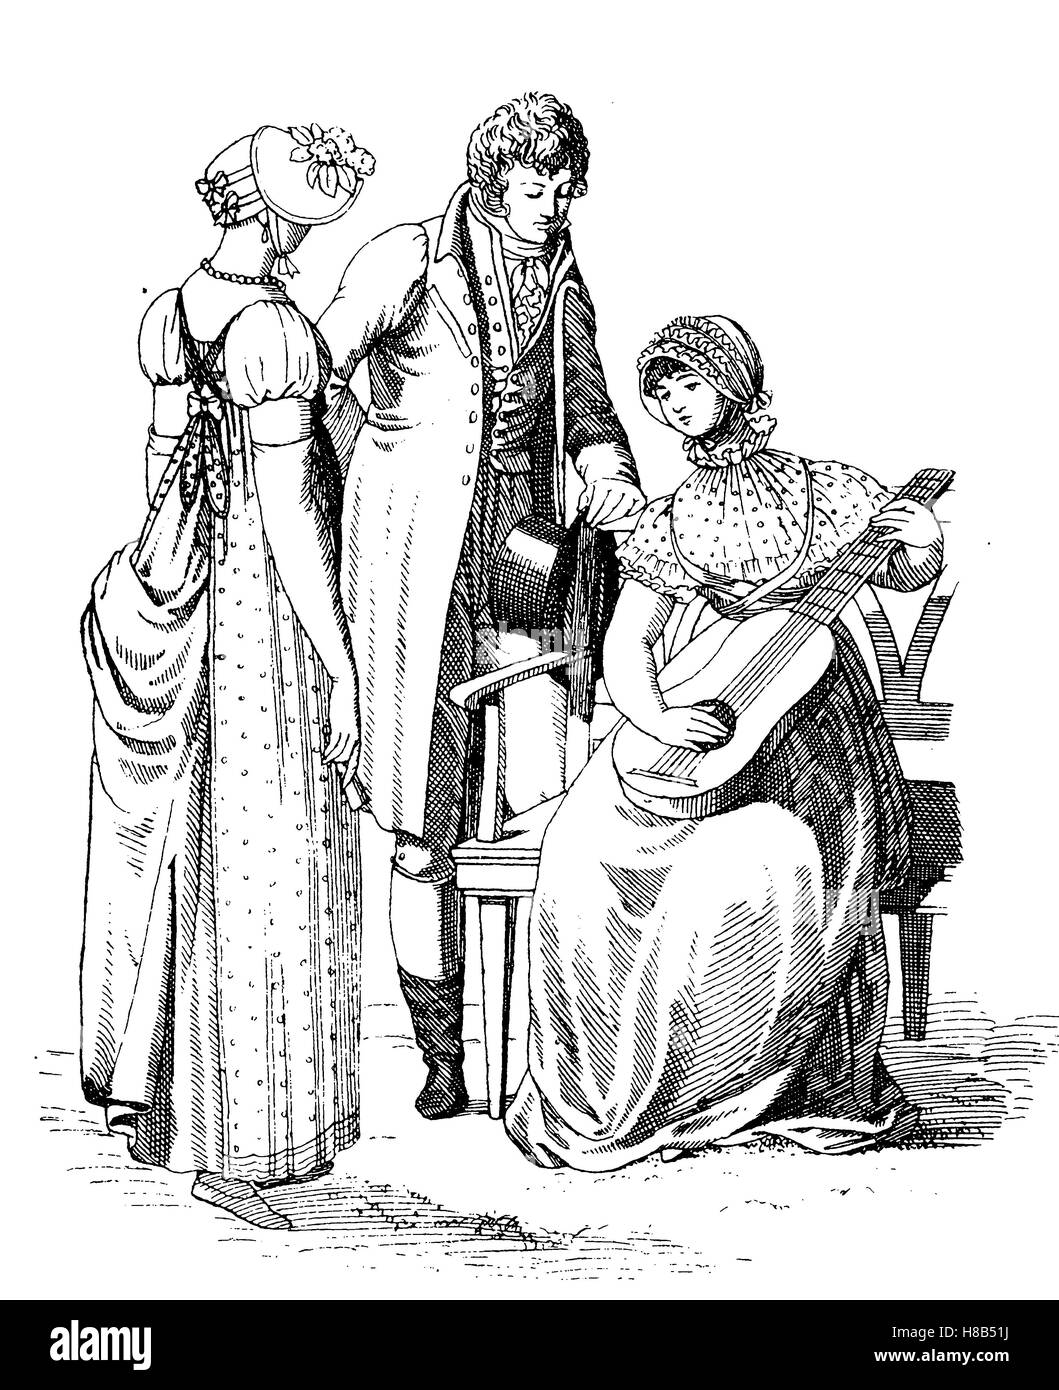 Man and lady's fashion in the year 1807, Germany, History of fashion, costume story Stock Photo